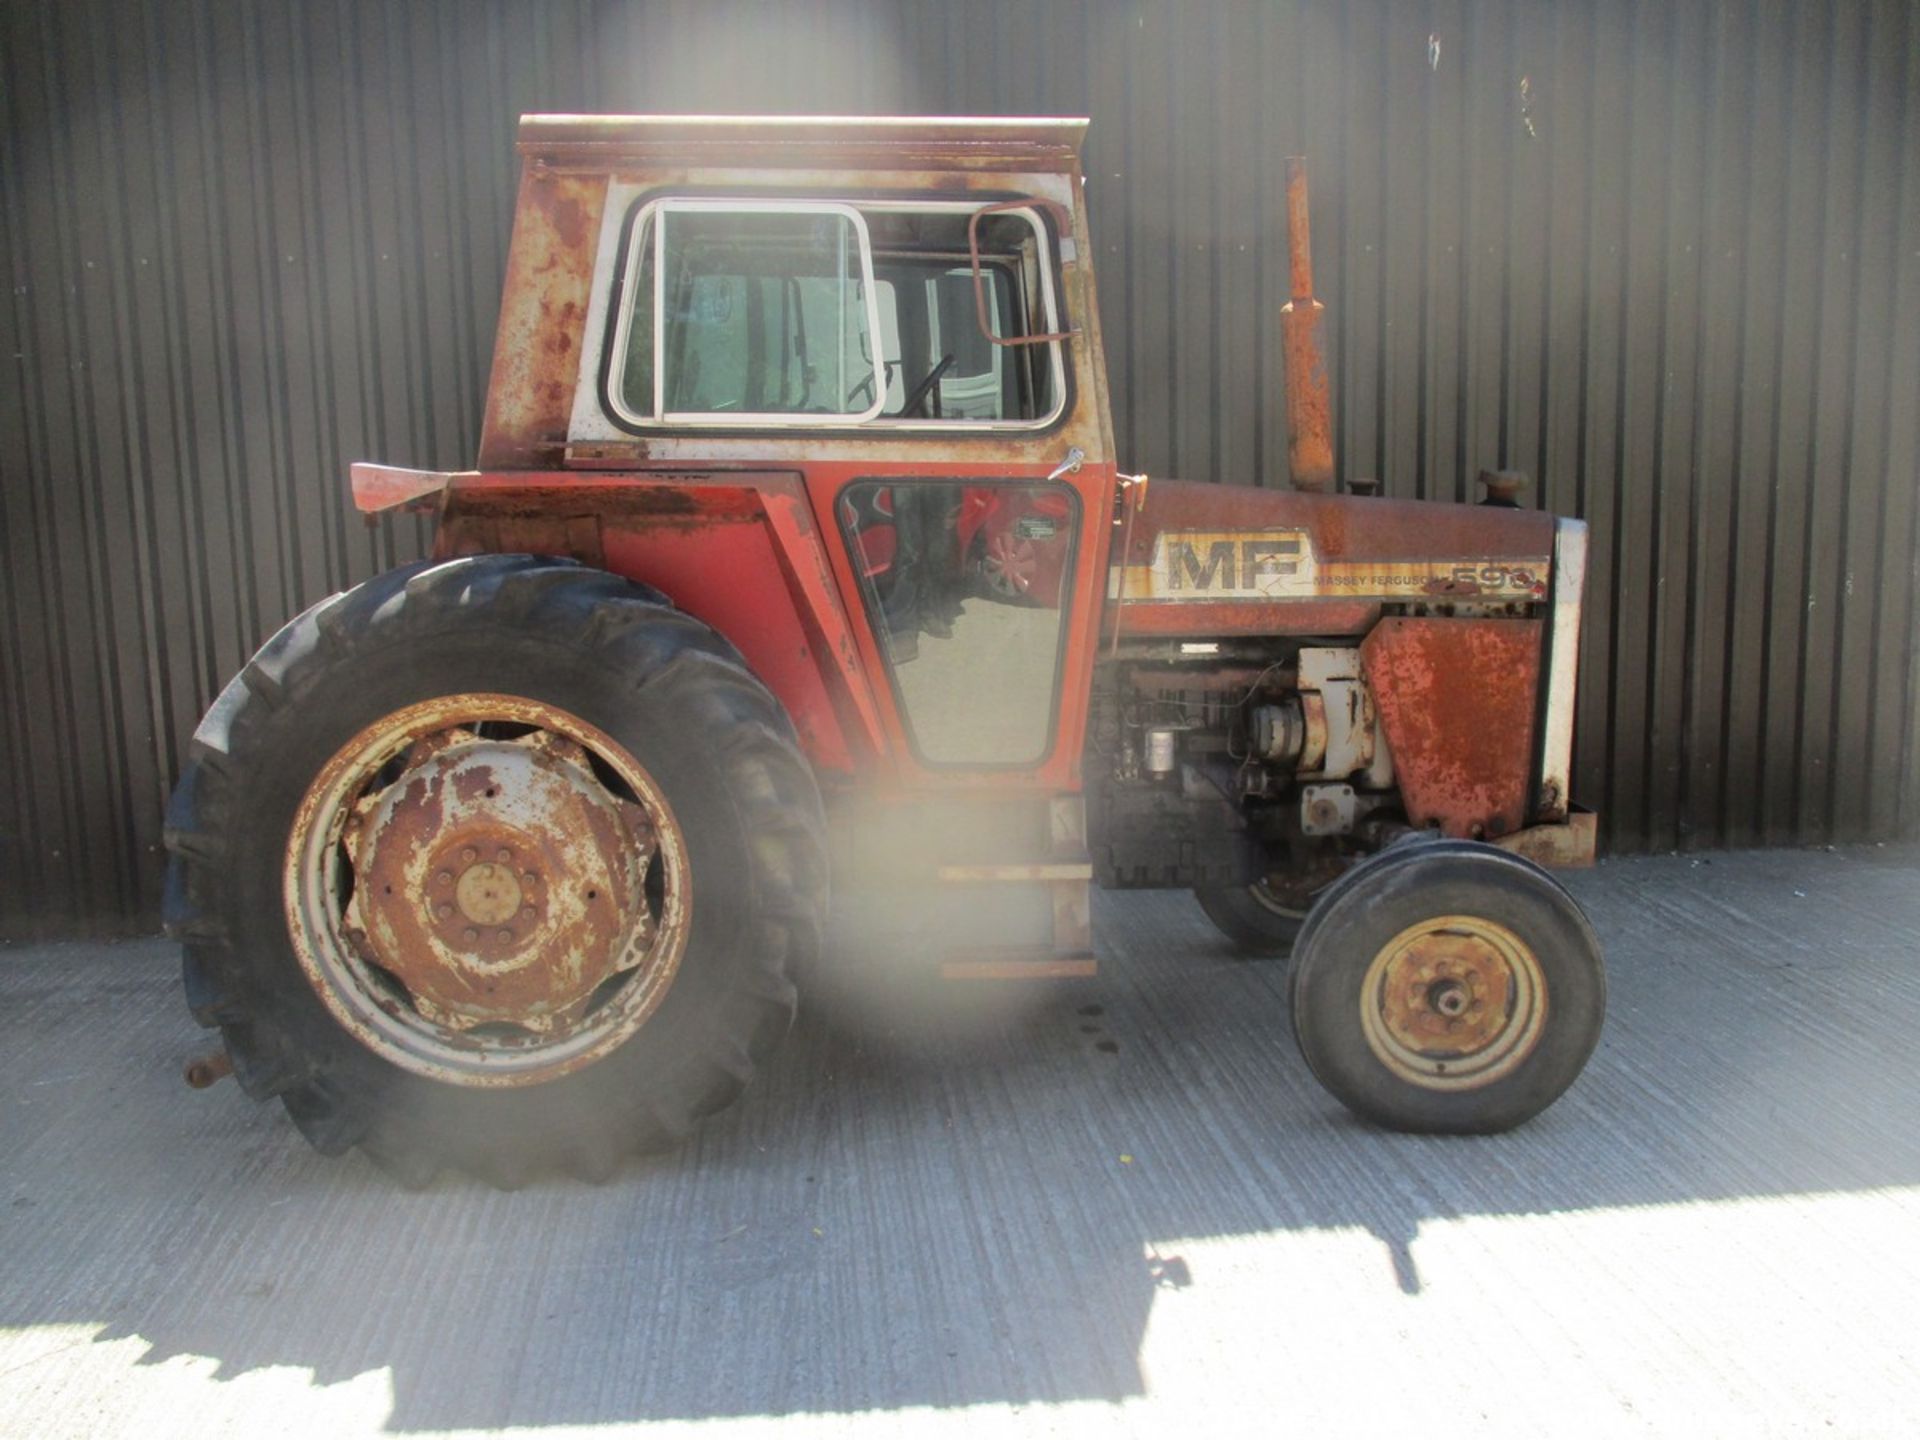 M.F.590 TRACTOR XUO 25V (YR 1980) NON RUNNER 8 SPEED - Image 3 of 3